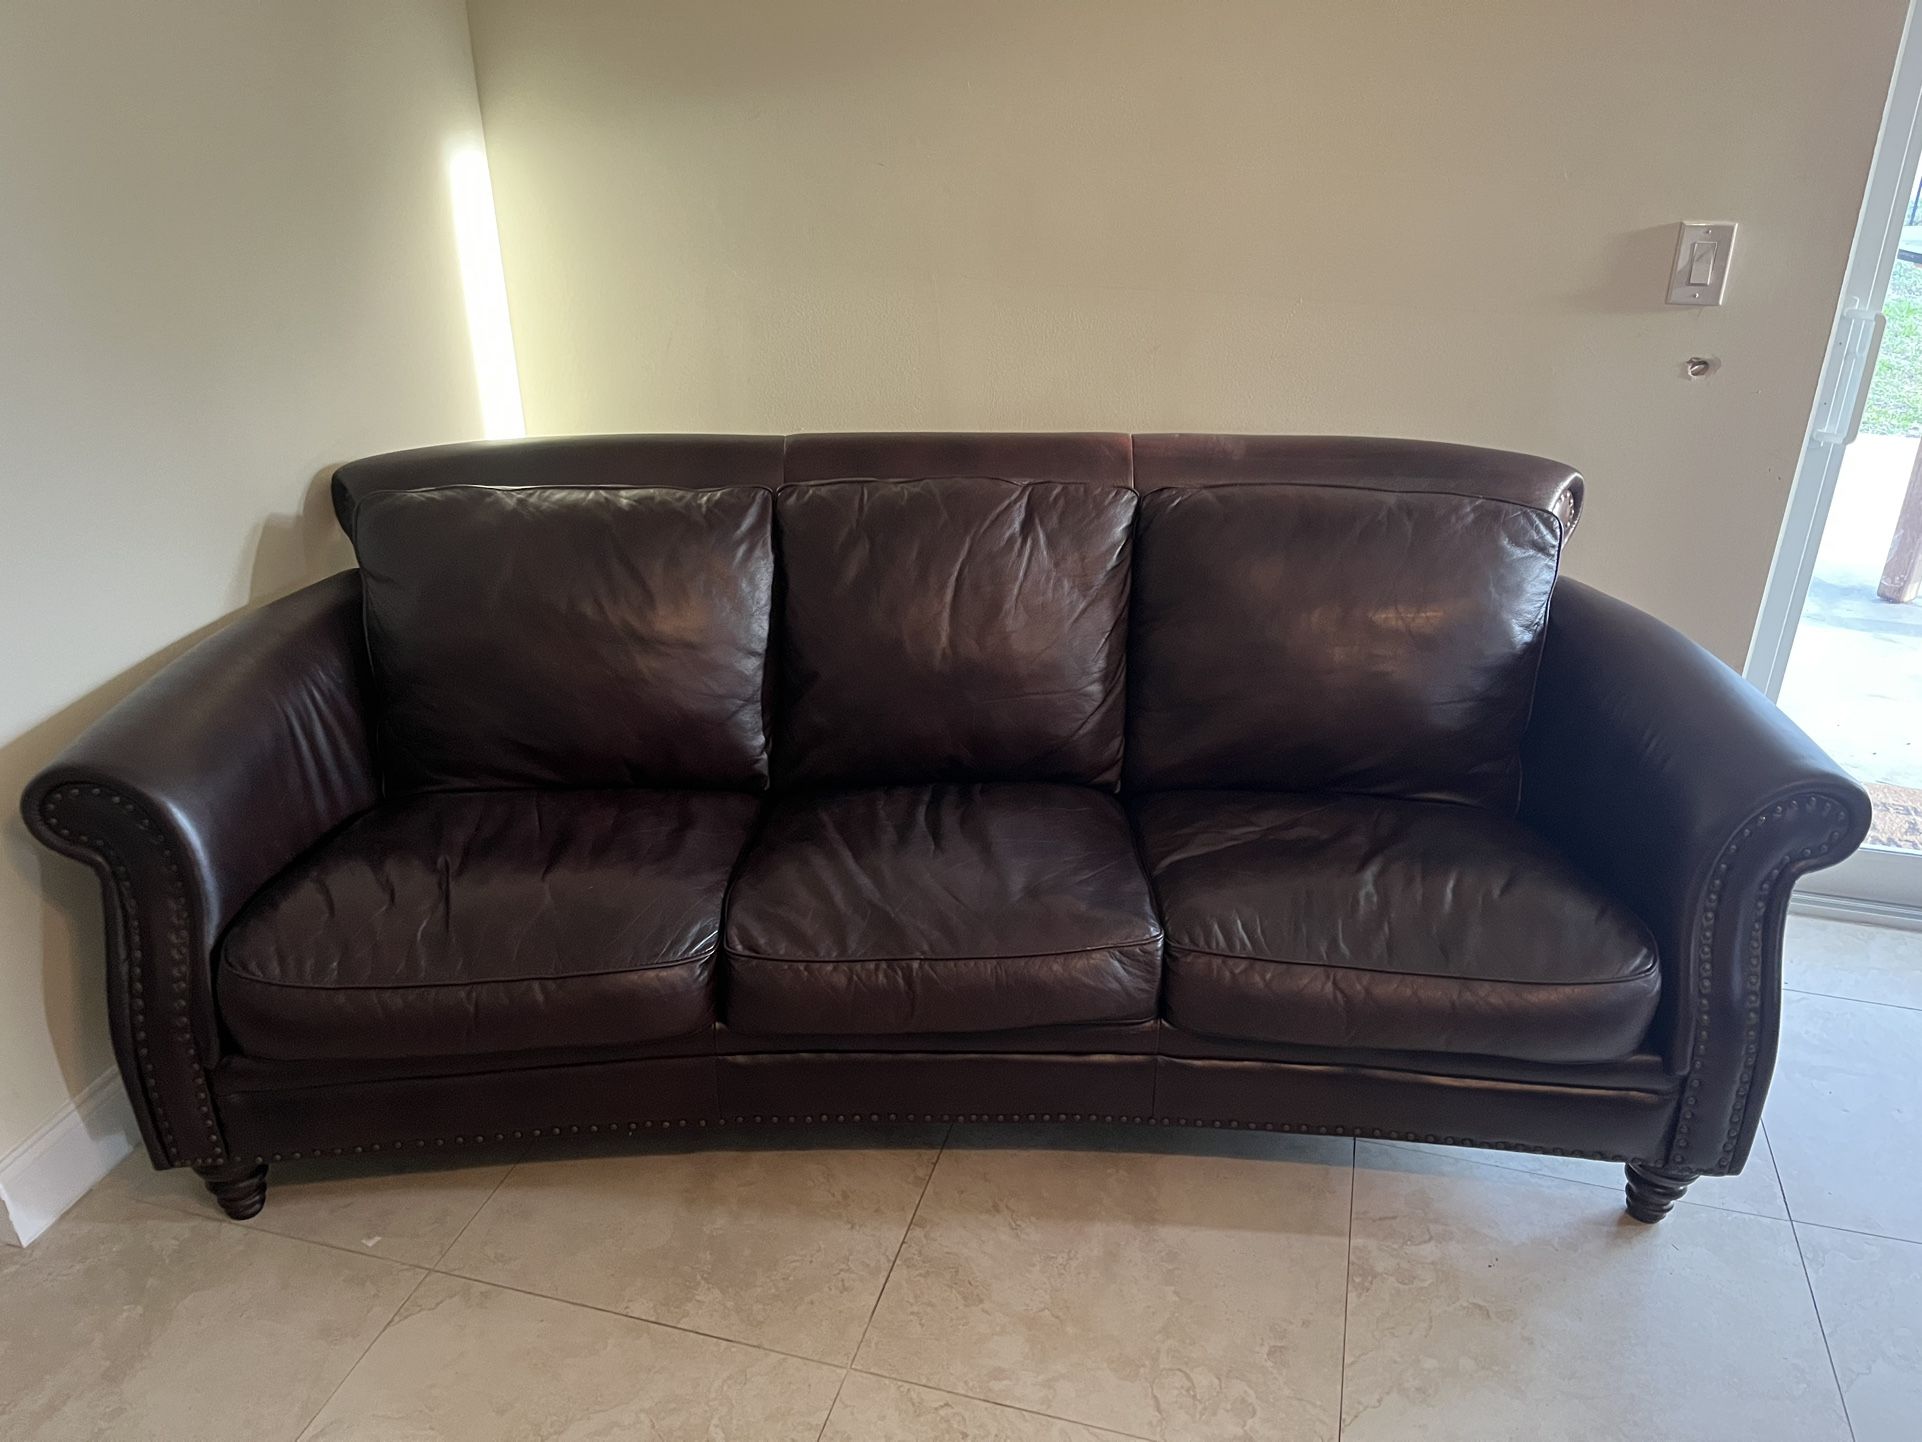 Leather Couch And Chair With Footrests